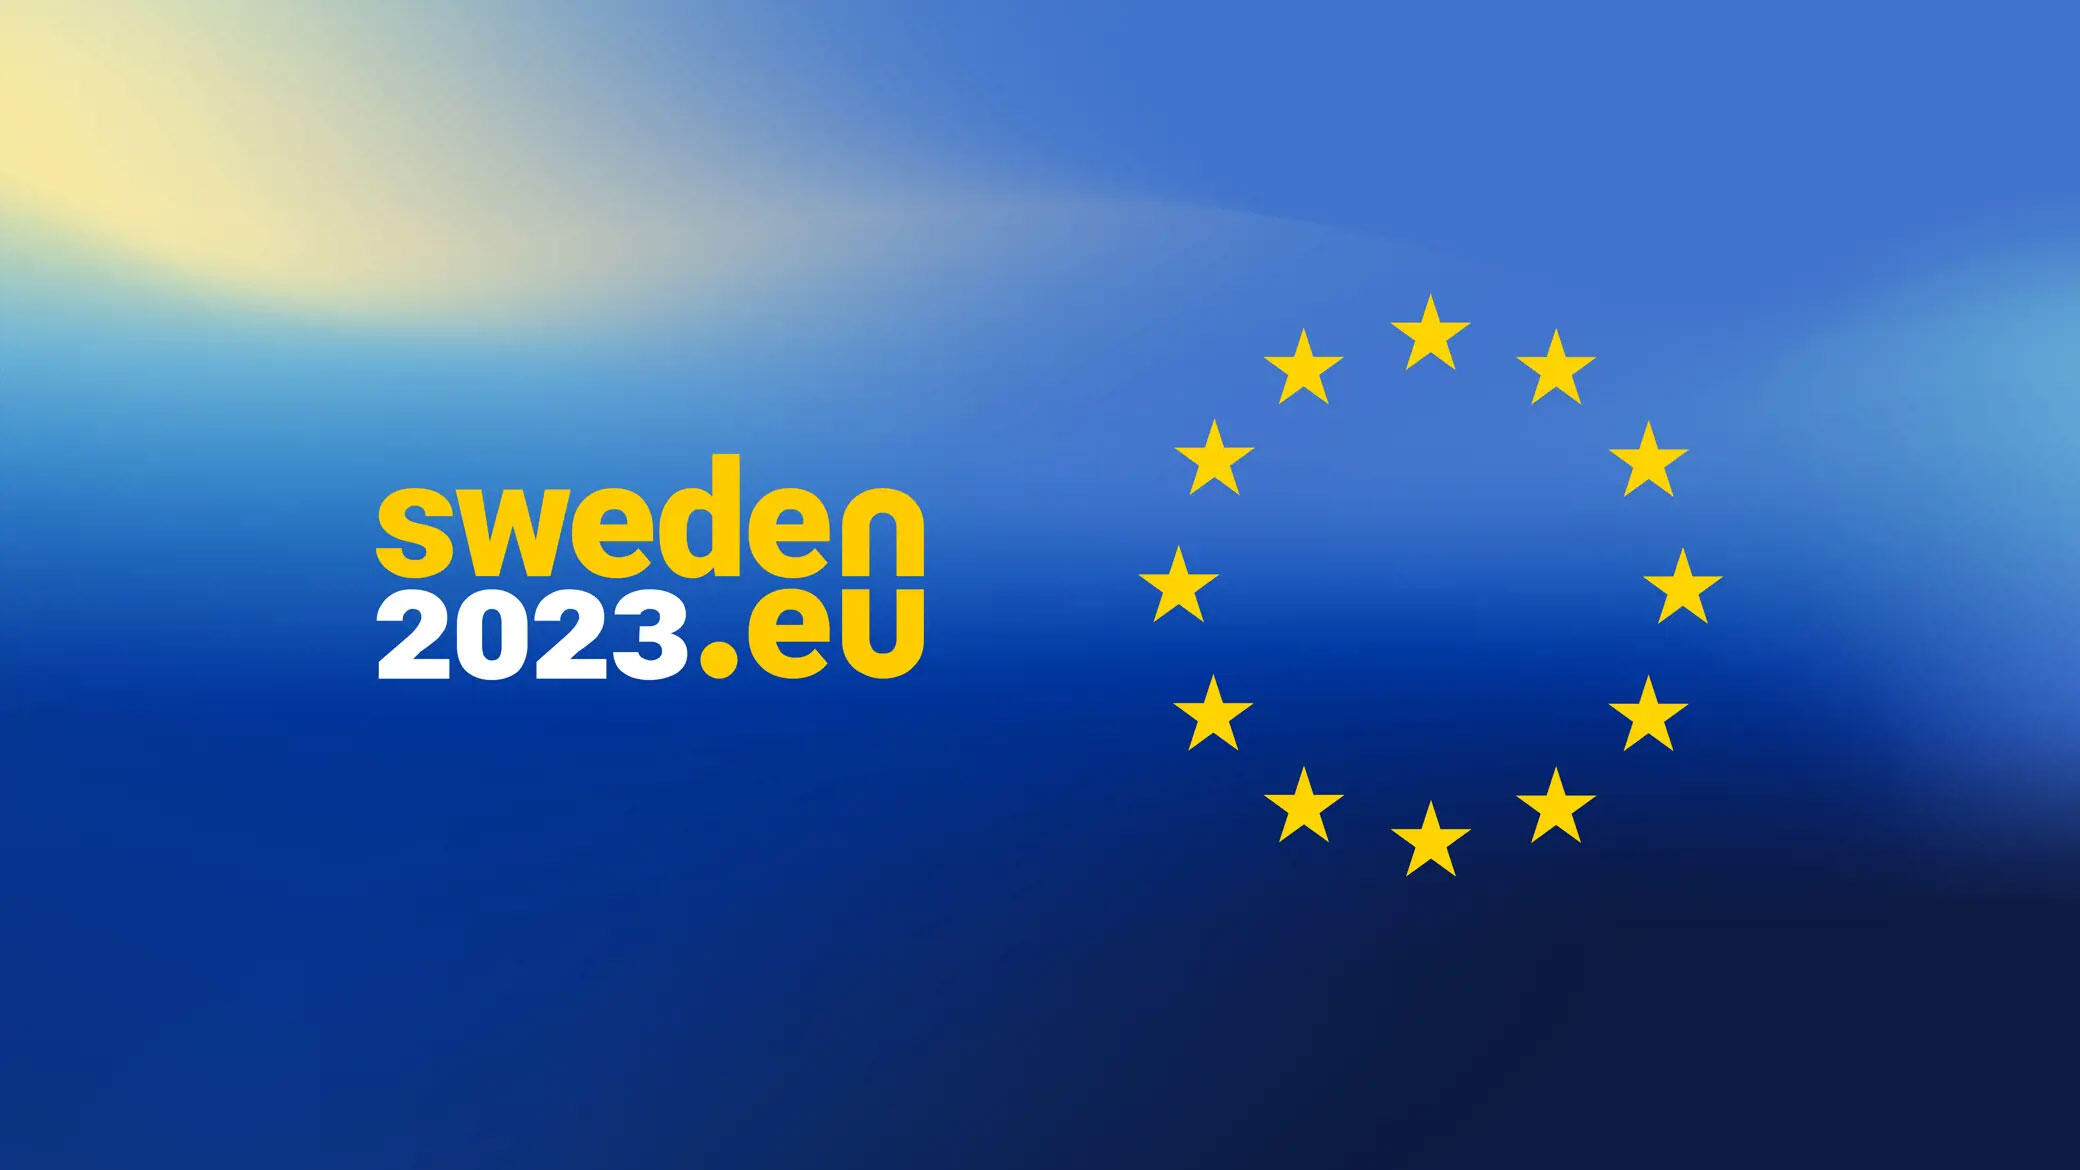 Swedish Presidency of the Council of the EU 2023